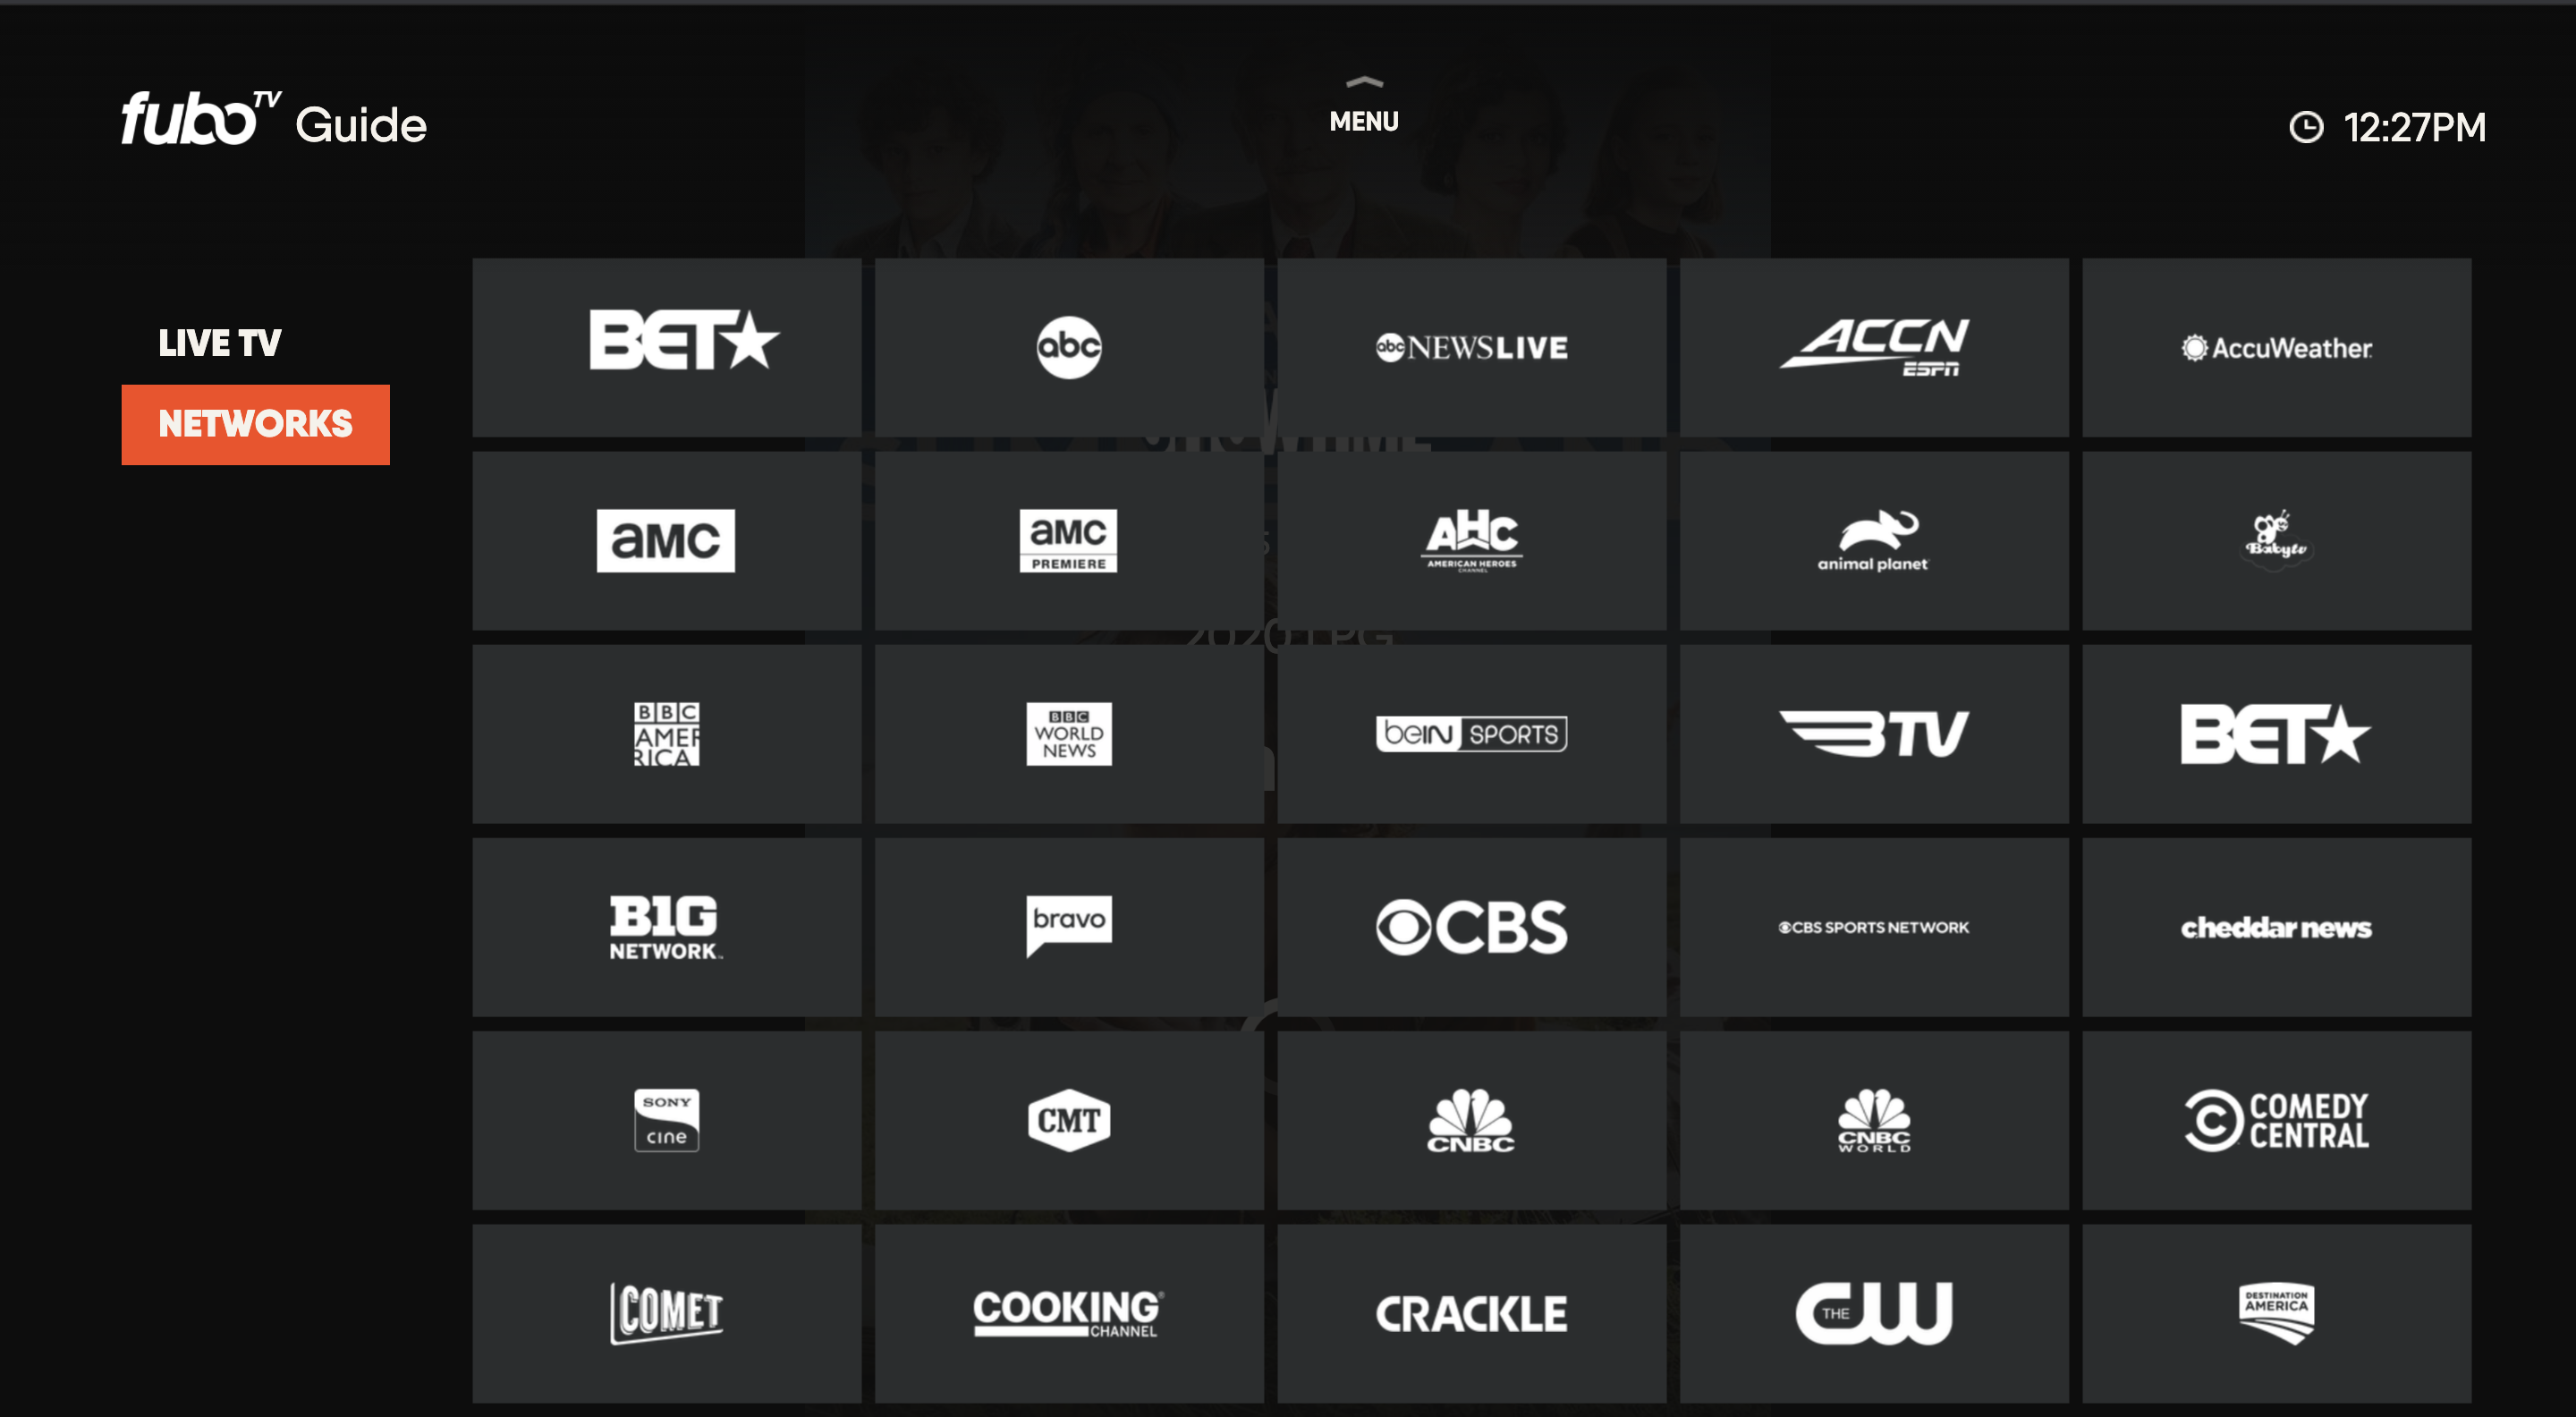 NETWORKS screen of the FuboTV app on LG TV showing available channels; accessible from the GUIDE screen